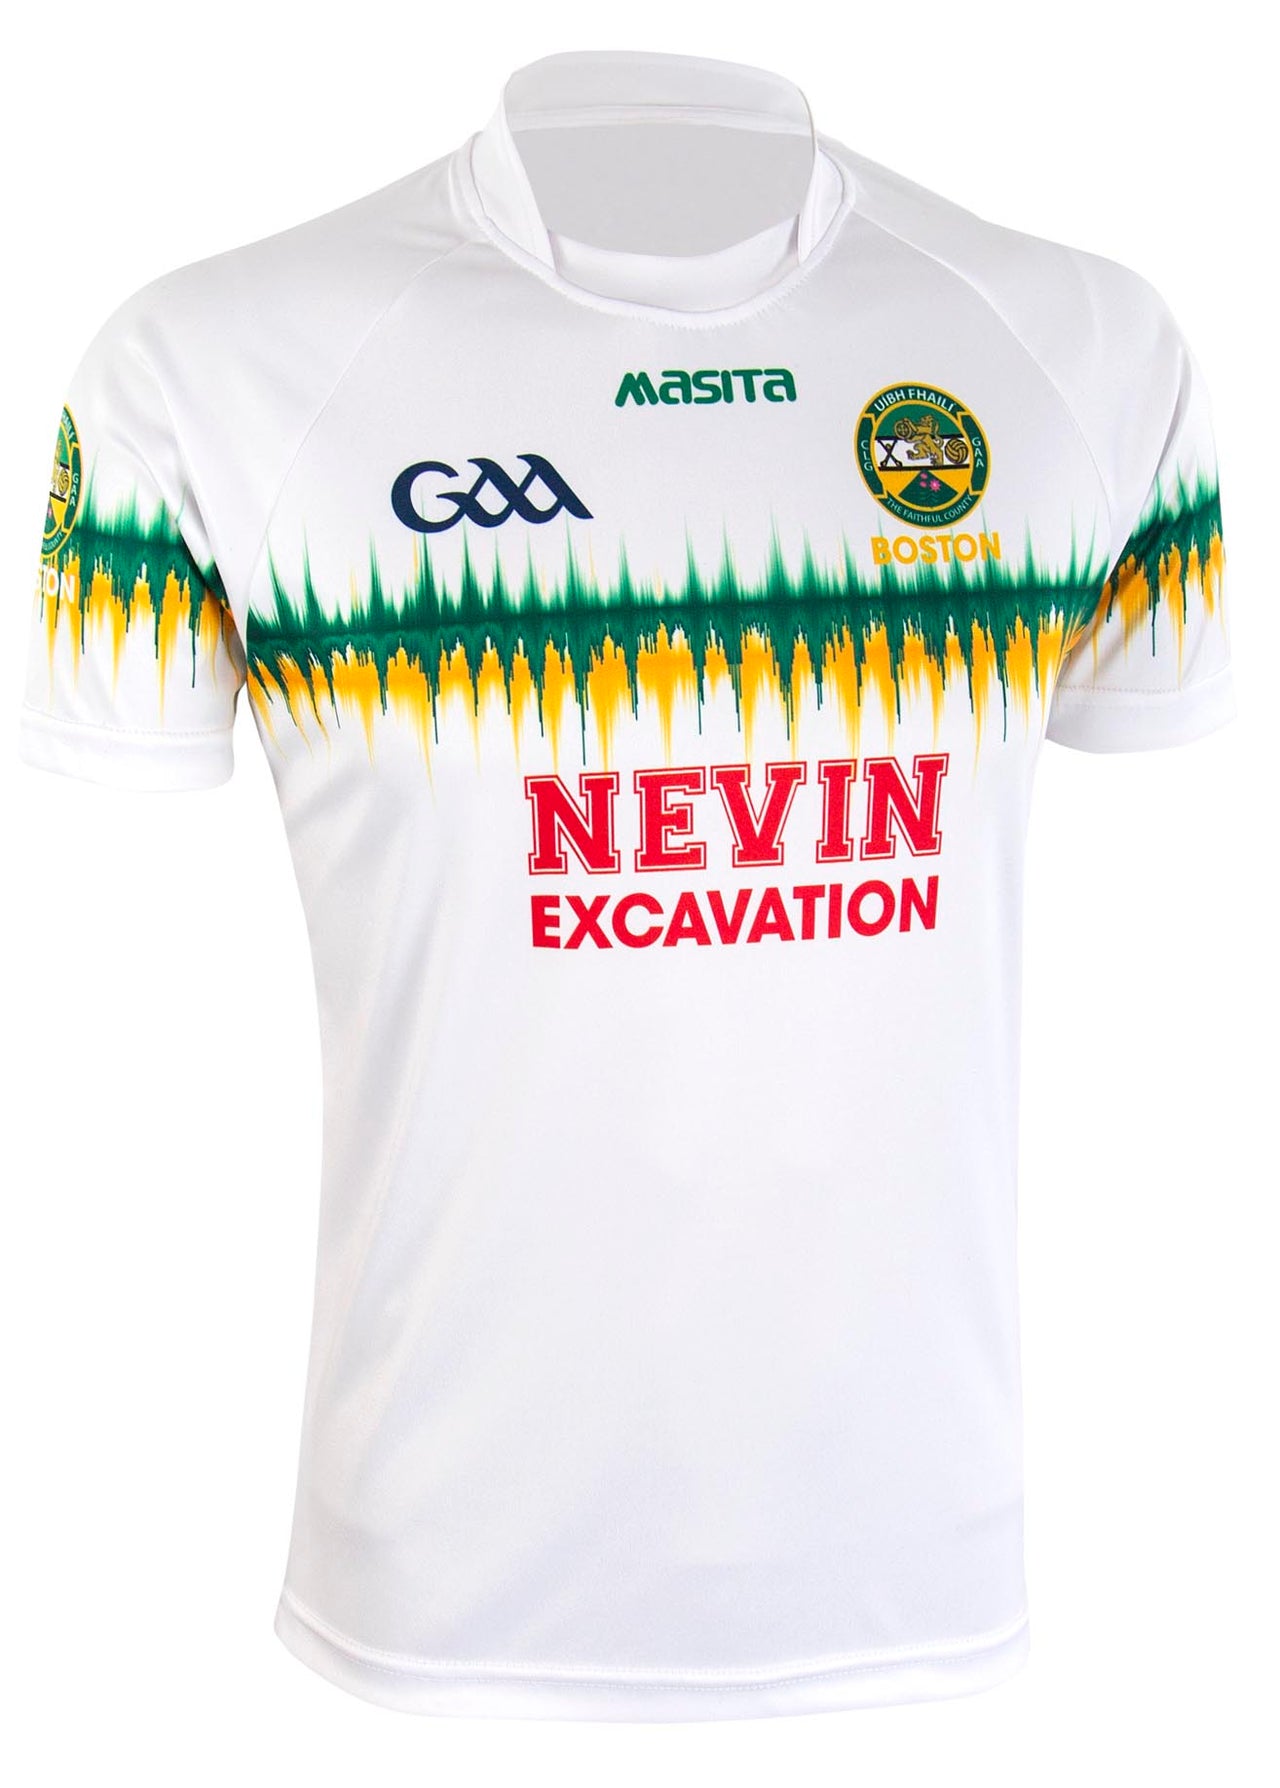 Offaly Boston Away Jersey Regular Fit Adult